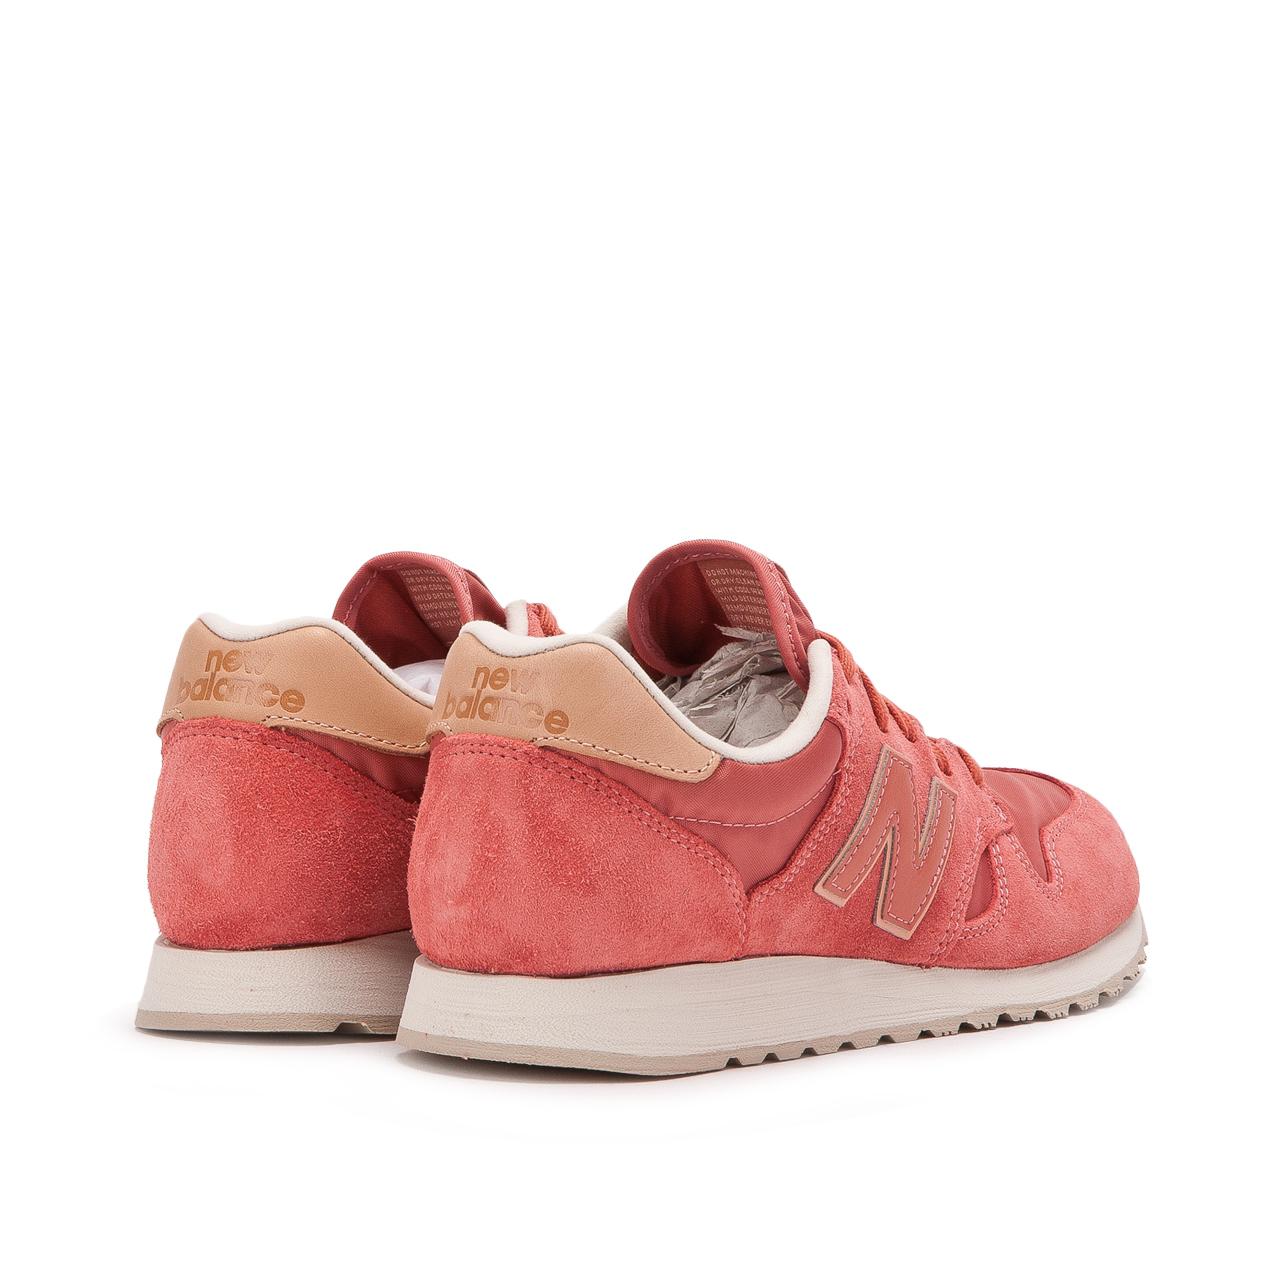 New Balance Wl 520 Bc in Rose (Pink) for Men - Lyst